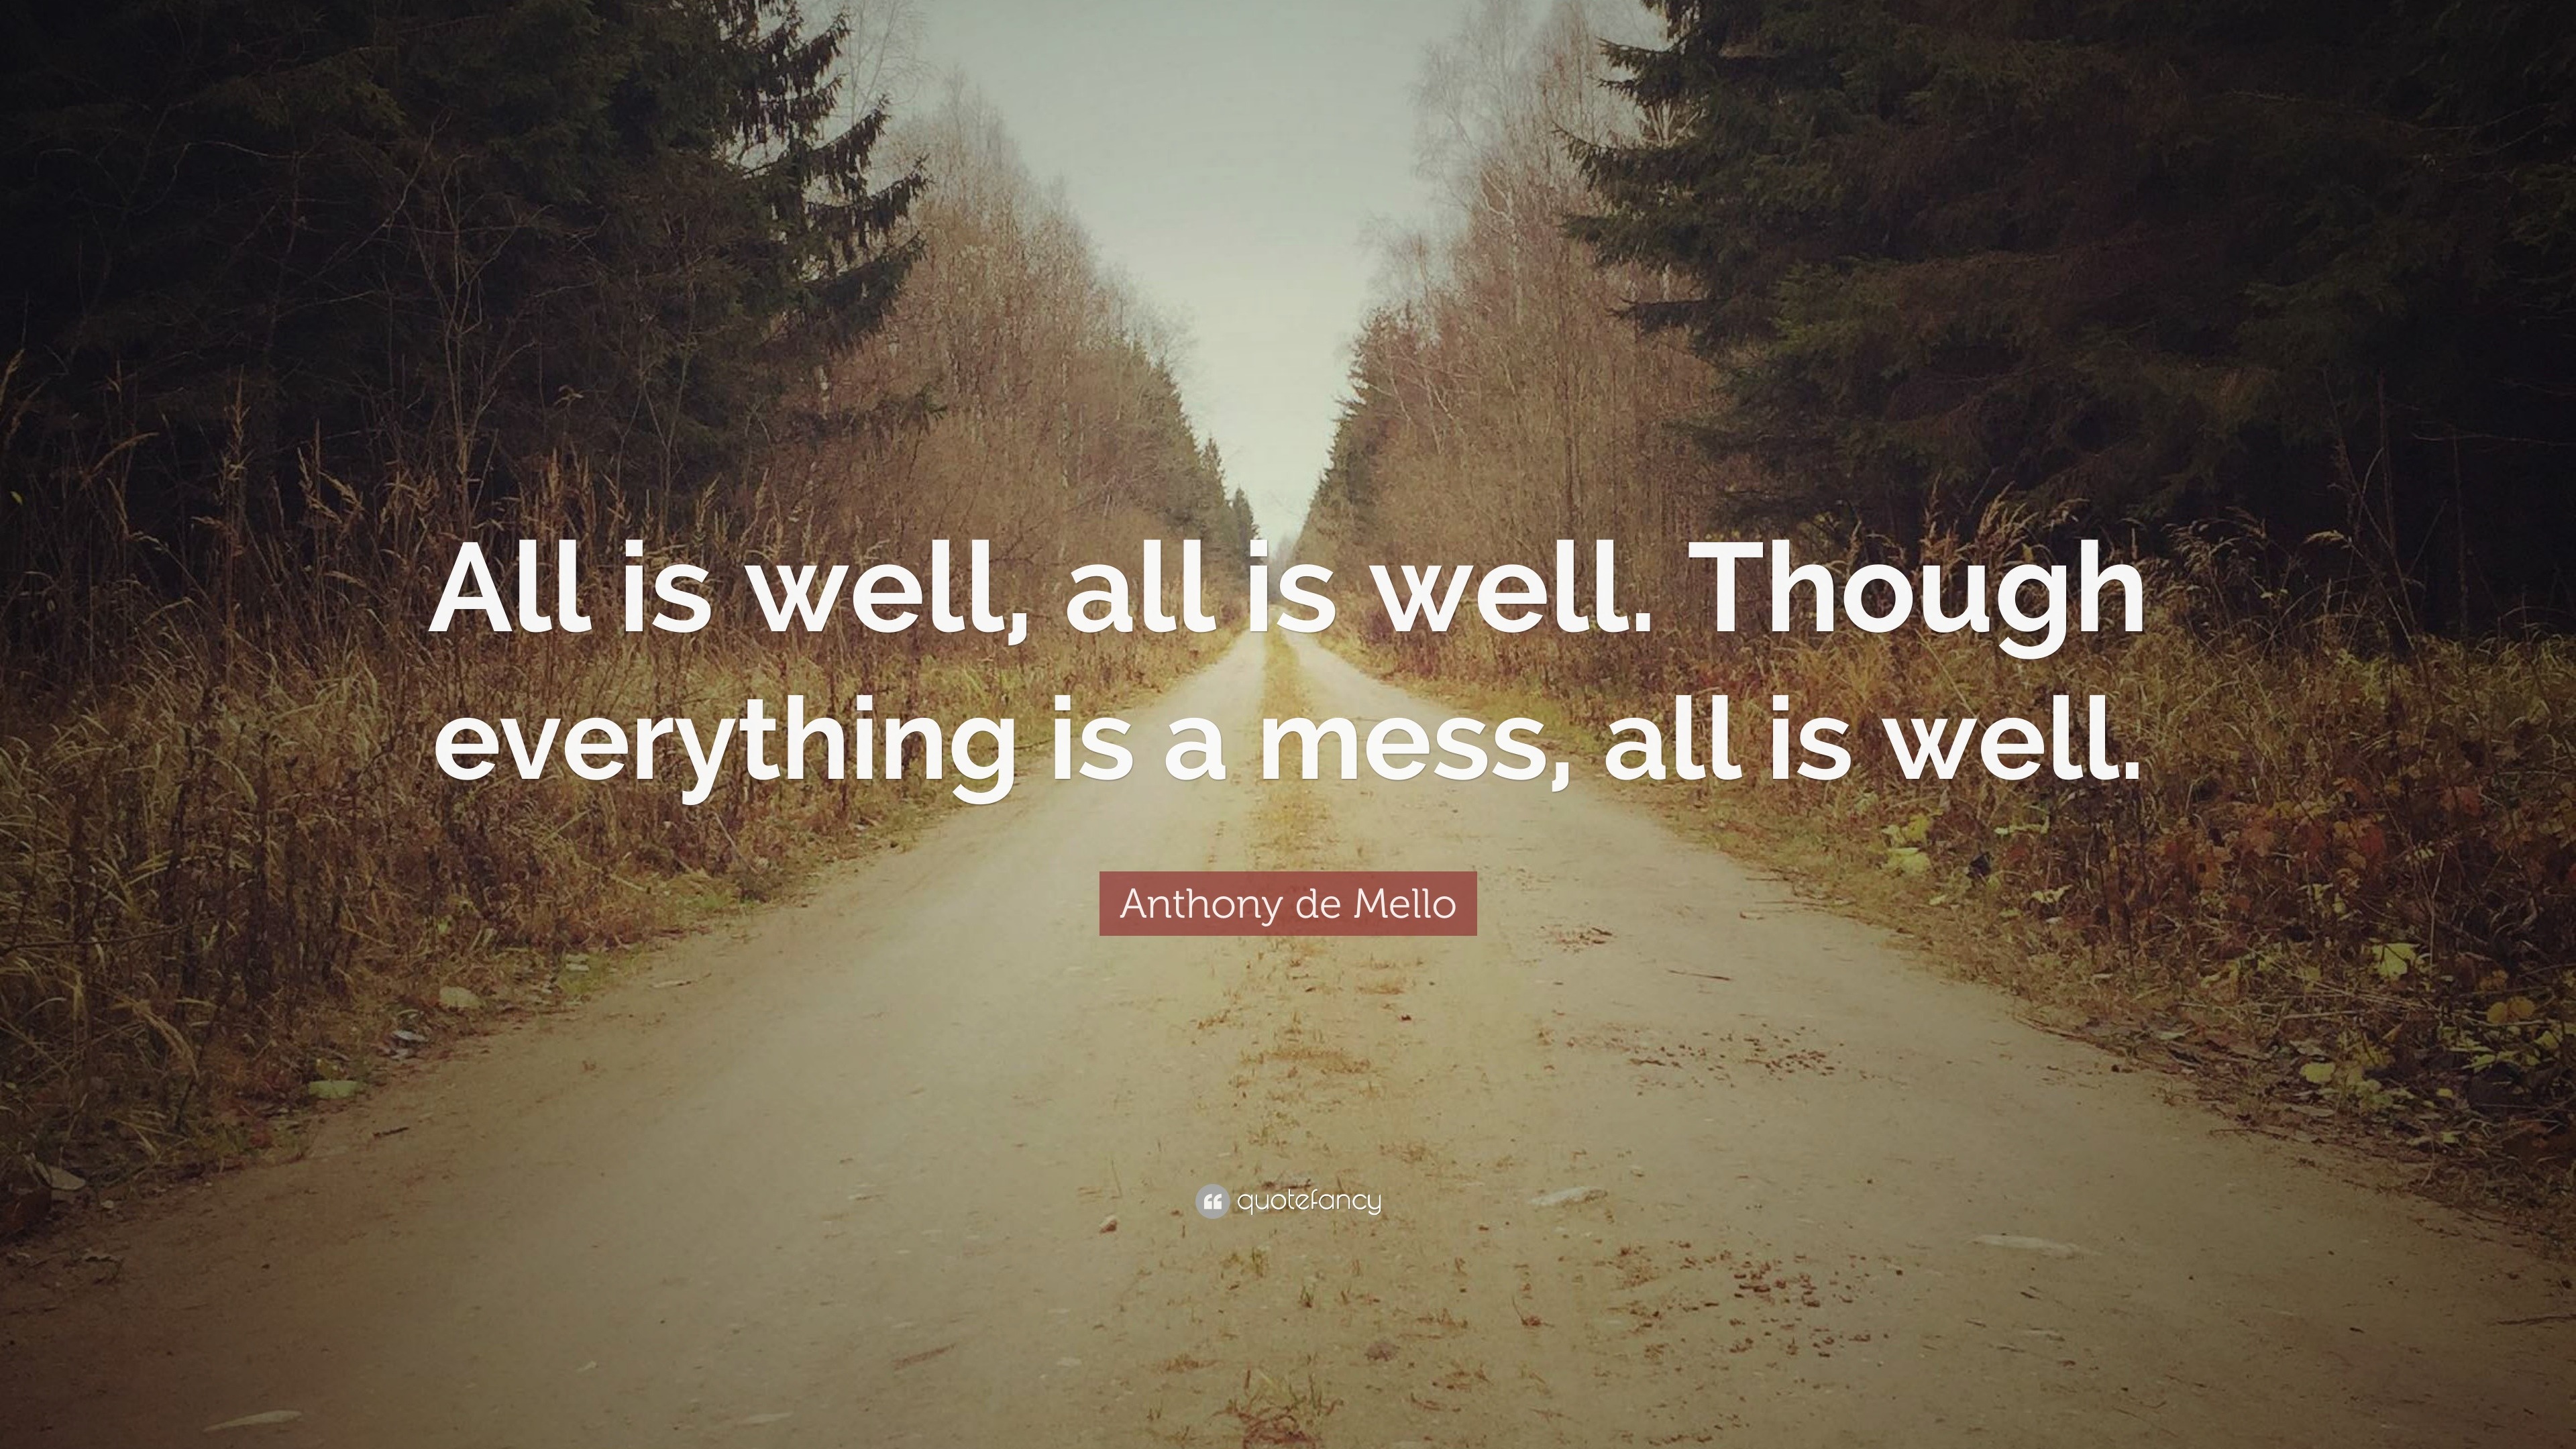 Anthony de Mello Quote: “All is well, all is well. Though everything is a  mess, all